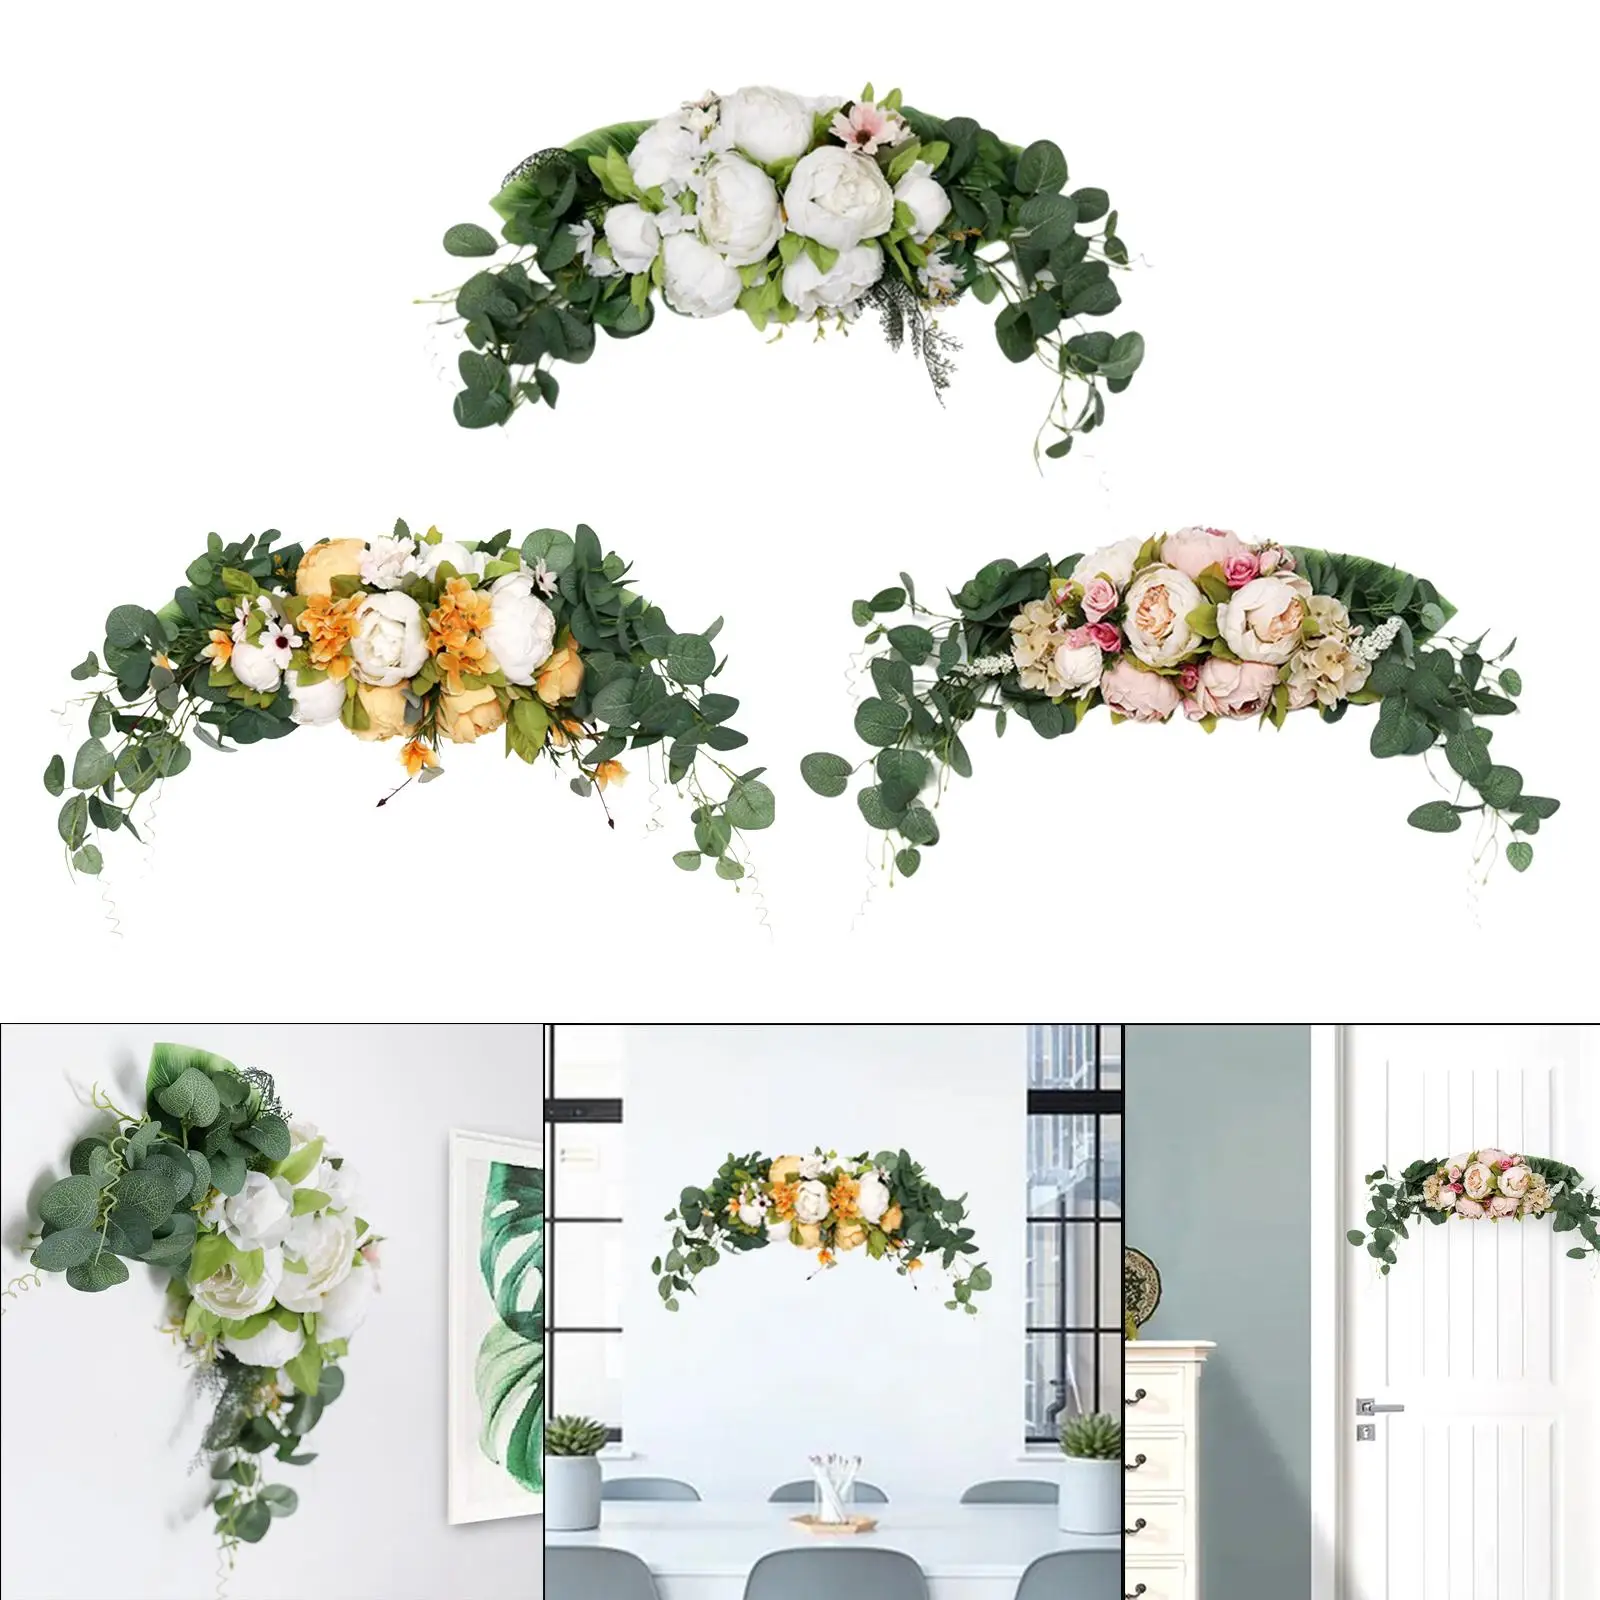 29.5inch Artificial Floral Garland Decorative Swag for Wedding Ceremony Sign